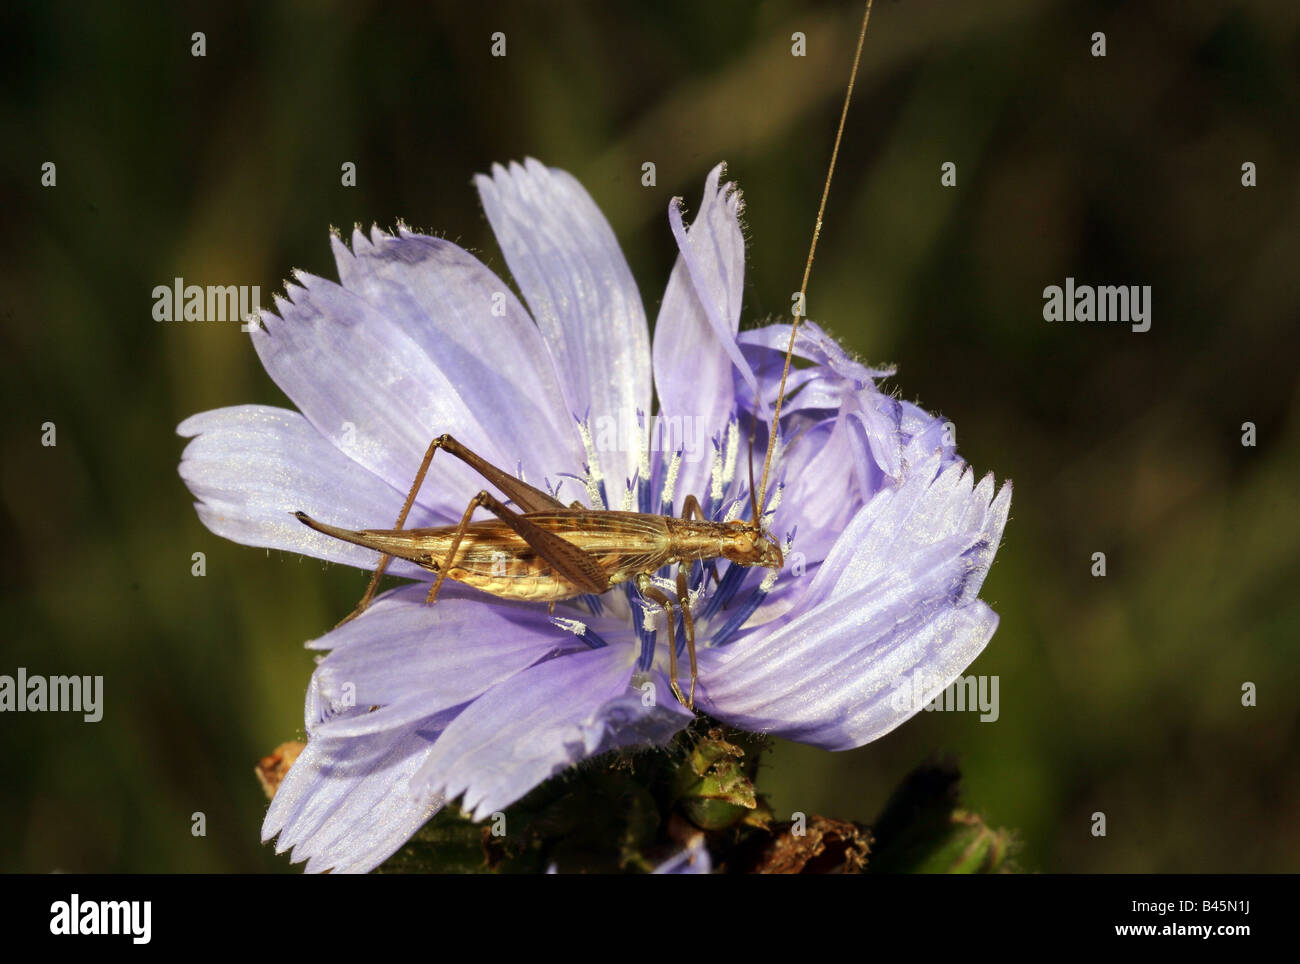 zoology / animals, insect, Oecanthidae, Oecanthus pellucens, sitting on flower, Leitha mountains, Austria, distribution: Europe, Additional-Rights-Clearance-Info-Not-Available Stock Photo